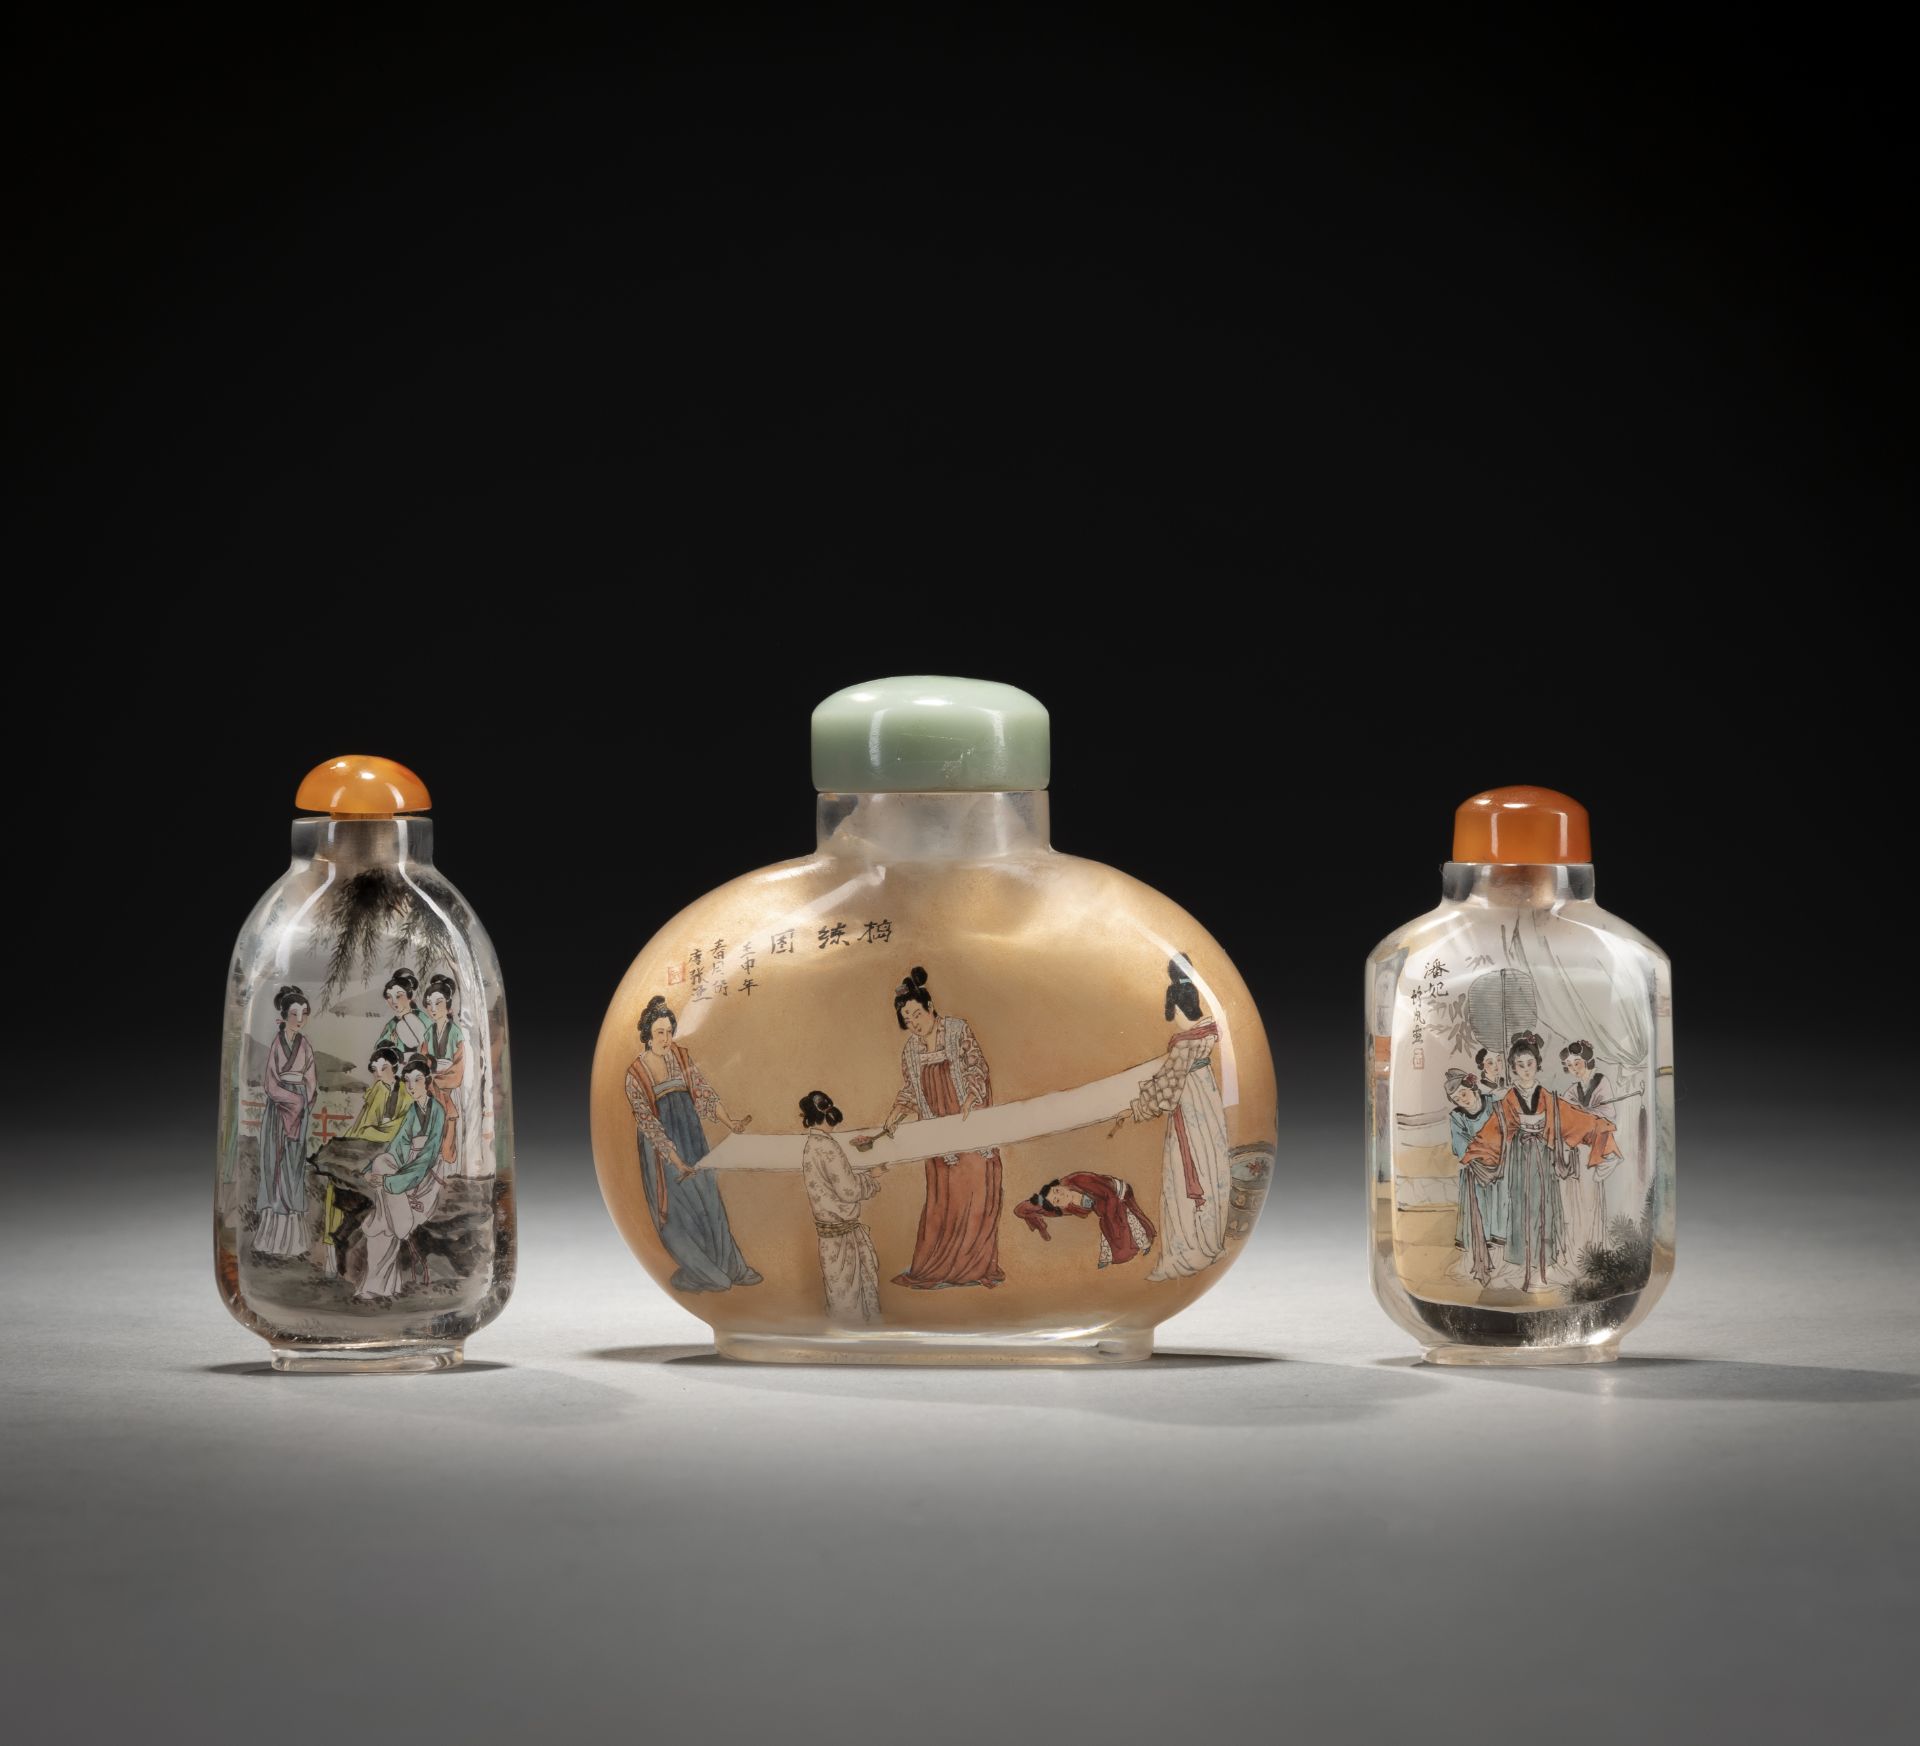 THREE GLASS SNUFF BOTTLES WITH INSIDE PAINTING DEPICTING COURT LADIES - Image 3 of 5